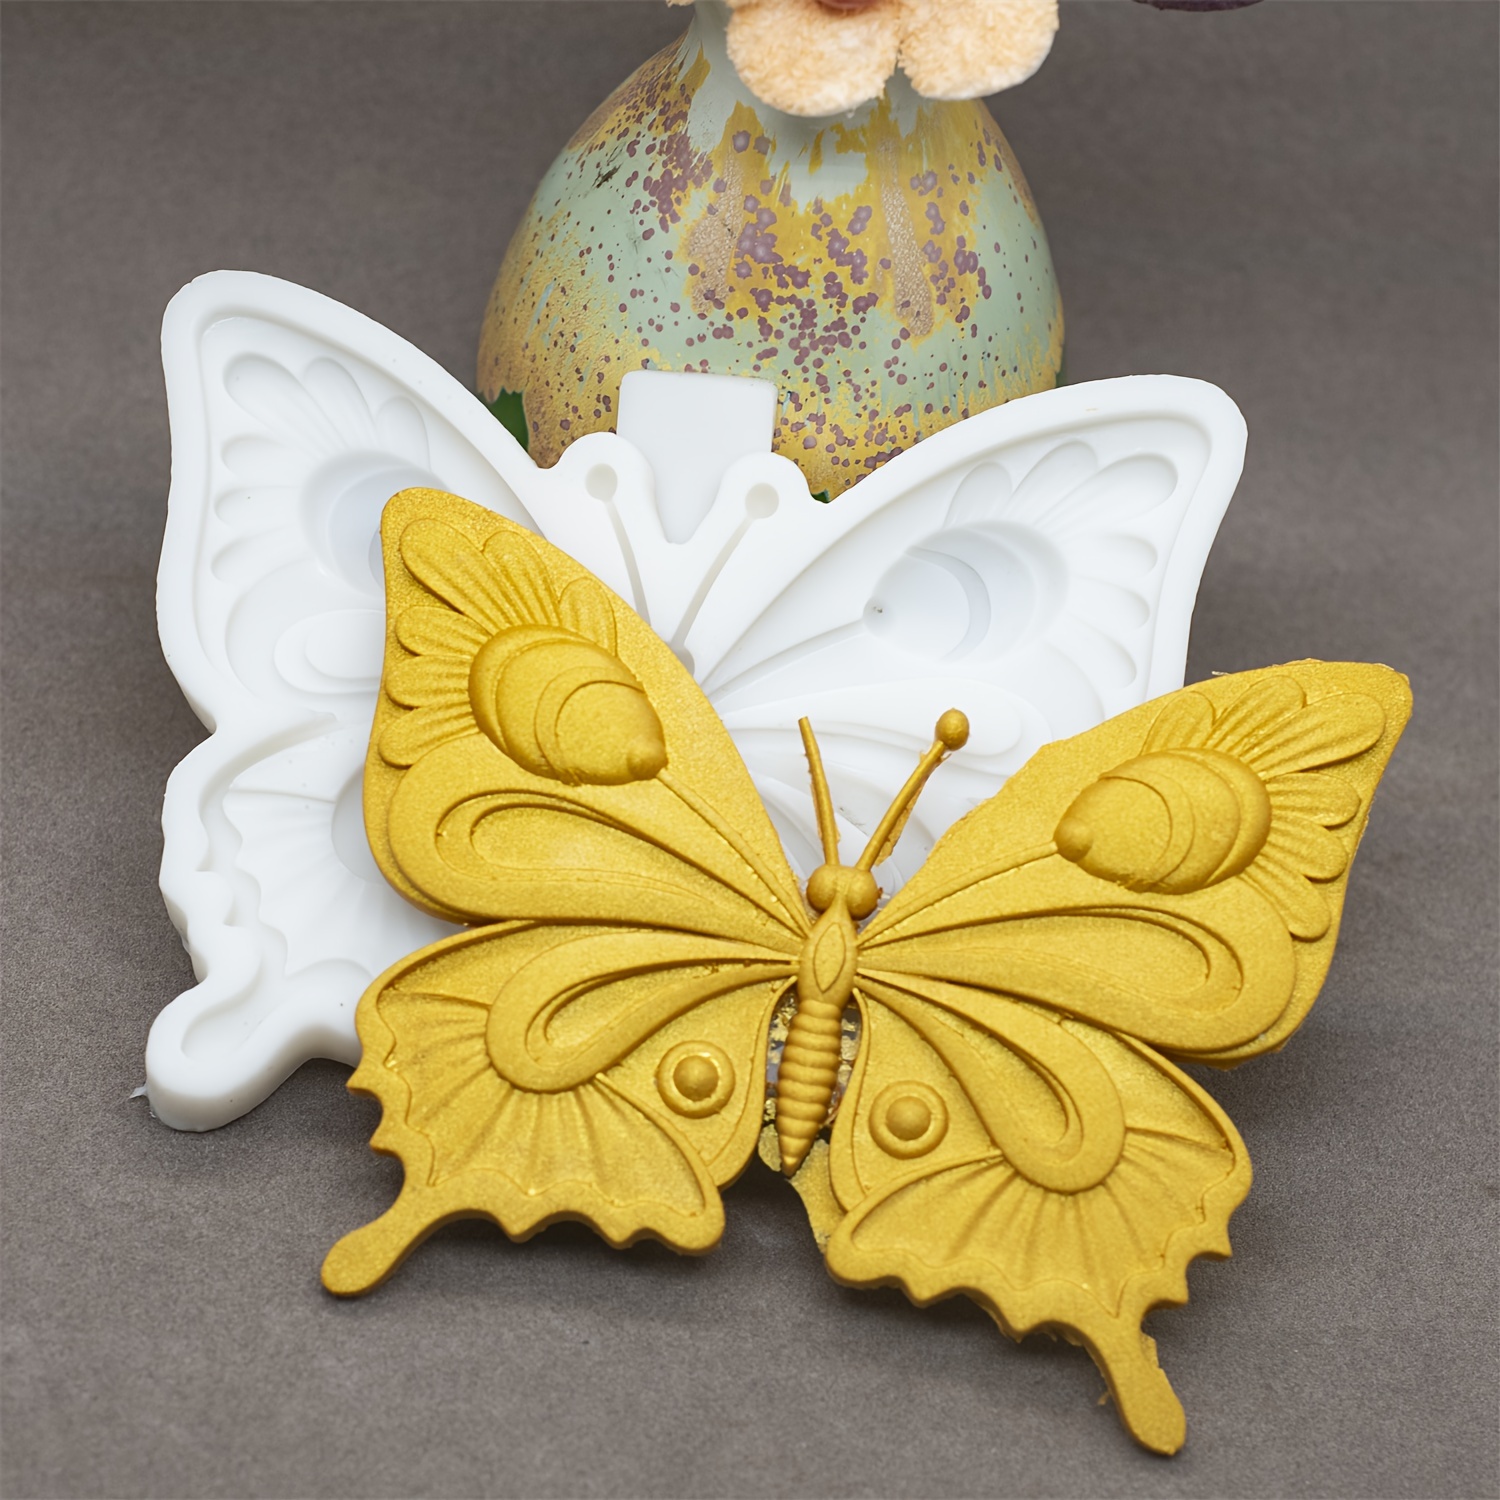 Exquisite Large Silicone Resin Coaster Molds - Create Stunning Moth and  Butterfly Art Pieces